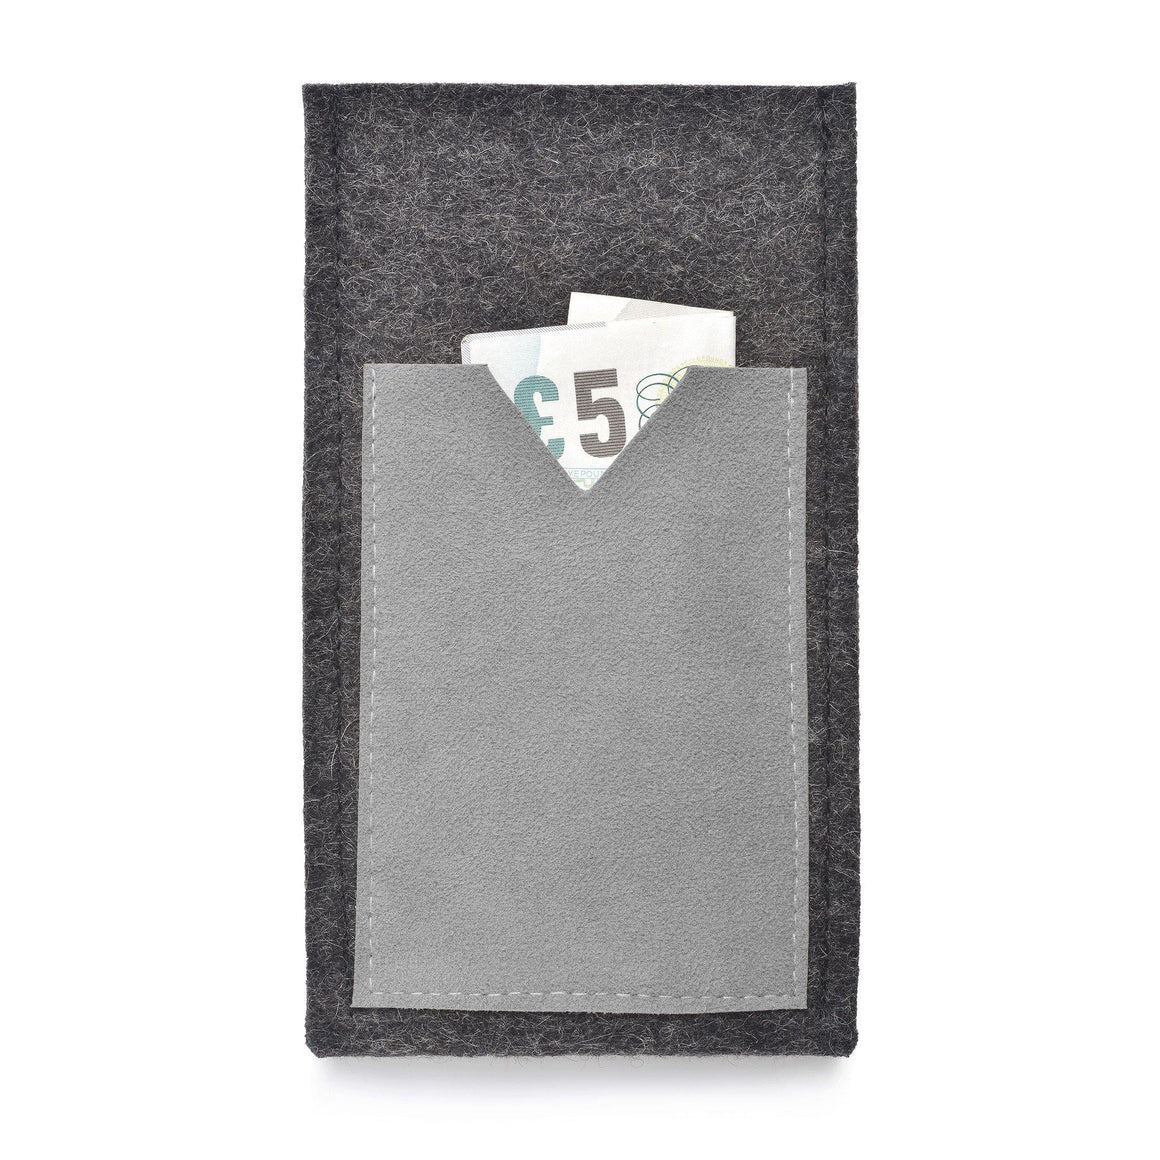 iPhone Wool Felt Cover Charcoal/Grey - Wrappers UK